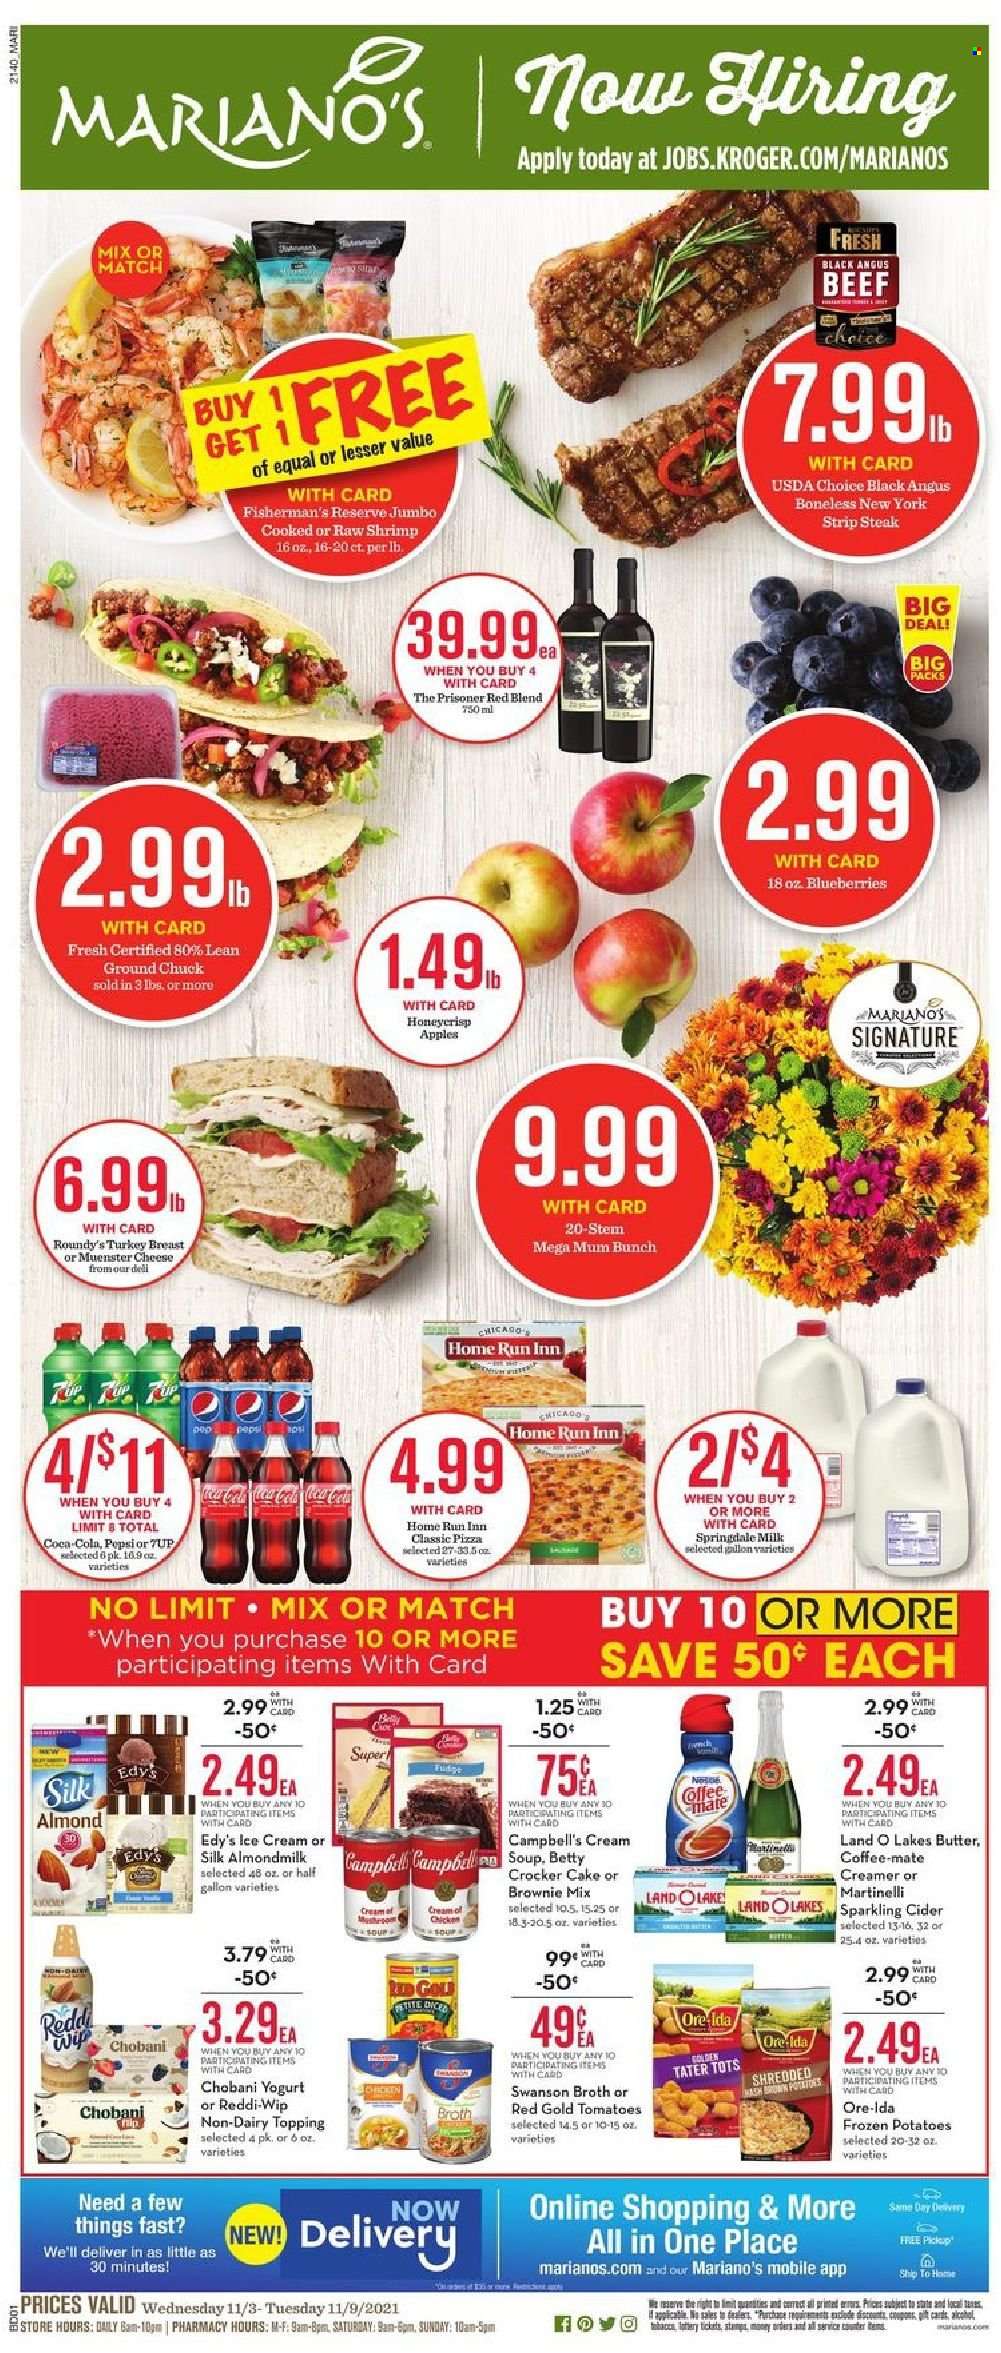 thumbnail - Mariano’s Flyer - 11/03/2021 - 11/09/2021 - Sales products - cake, brownie mix, potatoes, apples, blueberries, shrimps, Campbell's, pizza, soup, Münster cheese, yoghurt, Chobani, almond milk, Coffee-Mate, milk, butter, creamer, Ore-Ida, tater tots, fudge, topping, broth, 7UP, sparkling cider, sparkling wine, alcohol, cider, turkey breast, beef meat, ground chuck, steak, striploin steak. Page 1.